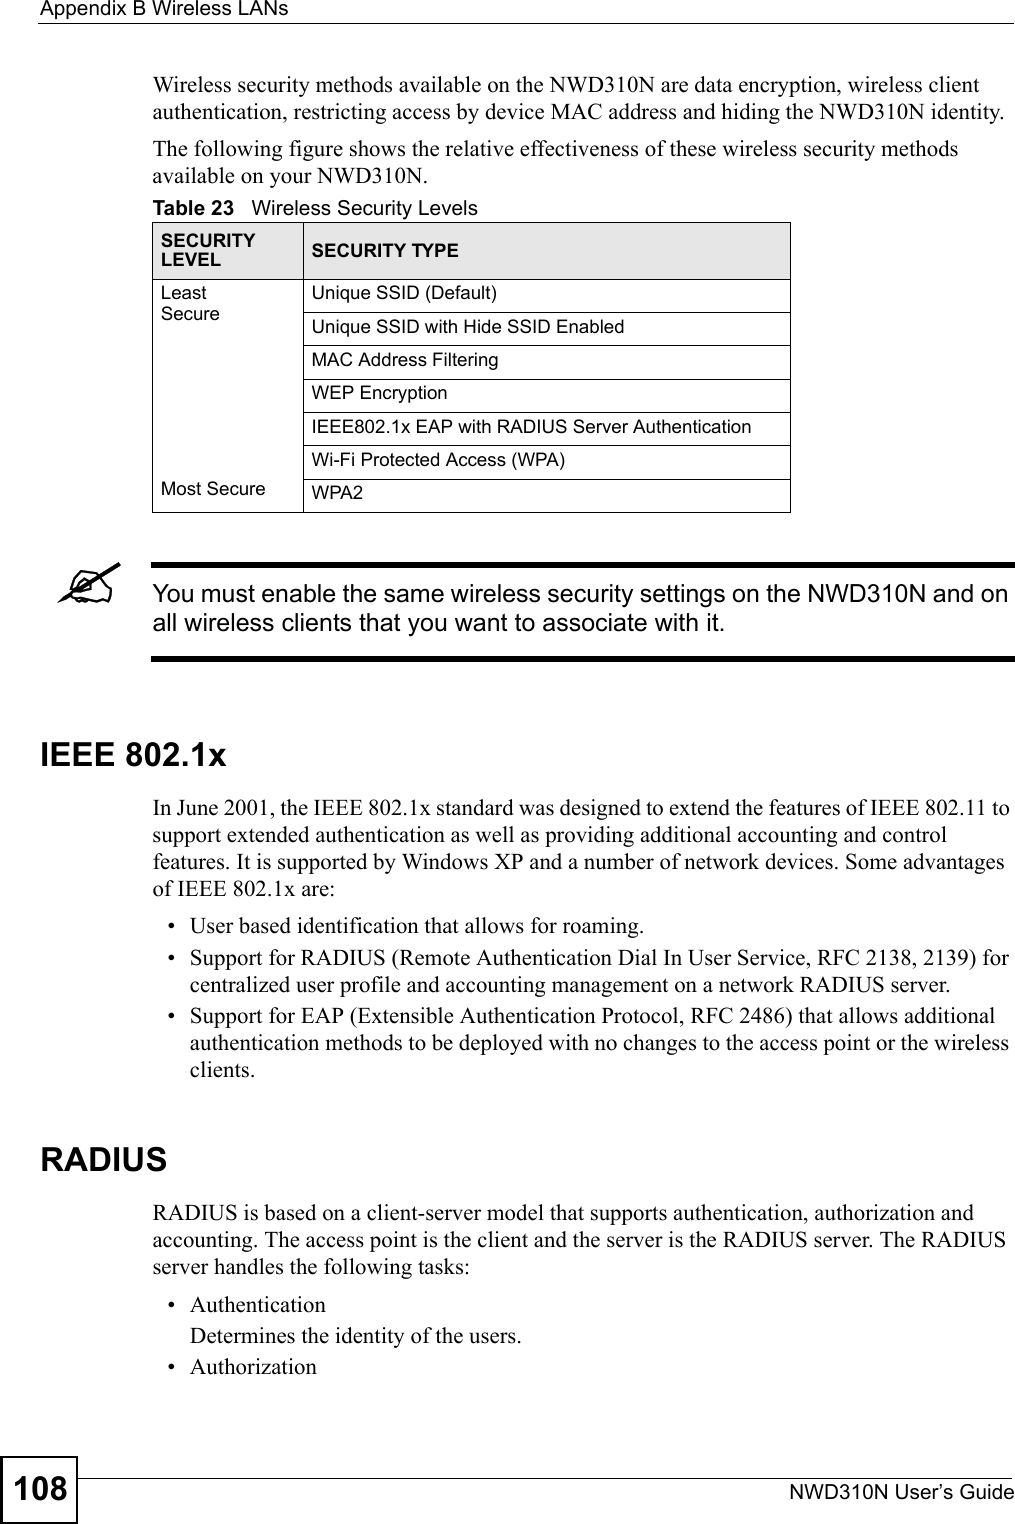 Appendix B Wireless LANsNWD310N User’s Guide108Wireless security methods available on the NWD310N are data encryption, wireless client authentication, restricting access by device MAC address and hiding the NWD310N identity.The following figure shows the relative effectiveness of these wireless security methods available on your NWD310N.&quot;You must enable the same wireless security settings on the NWD310N and on all wireless clients that you want to associate with it. IEEE 802.1xIn June 2001, the IEEE 802.1x standard was designed to extend the features of IEEE 802.11 to support extended authentication as well as providing additional accounting and control features. It is supported by Windows XP and a number of network devices. Some advantages of IEEE 802.1x are:• User based identification that allows for roaming.• Support for RADIUS (Remote Authentication Dial In User Service, RFC 2138, 2139) for centralized user profile and accounting management on a network RADIUS server. • Support for EAP (Extensible Authentication Protocol, RFC 2486) that allows additional authentication methods to be deployed with no changes to the access point or the wireless clients. RADIUSRADIUS is based on a client-server model that supports authentication, authorization and accounting. The access point is the client and the server is the RADIUS server. The RADIUS server handles the following tasks:• Authentication Determines the identity of the users.• AuthorizationTable 23   Wireless Security LevelsSECURITY LEVEL SECURITY TYPELeast       S e c u r e                                                                                      Most SecureUnique SSID (Default)Unique SSID with Hide SSID EnabledMAC Address FilteringWEP EncryptionIEEE802.1x EAP with RADIUS Server AuthenticationWi-Fi Protected Access (WPA)WPA2